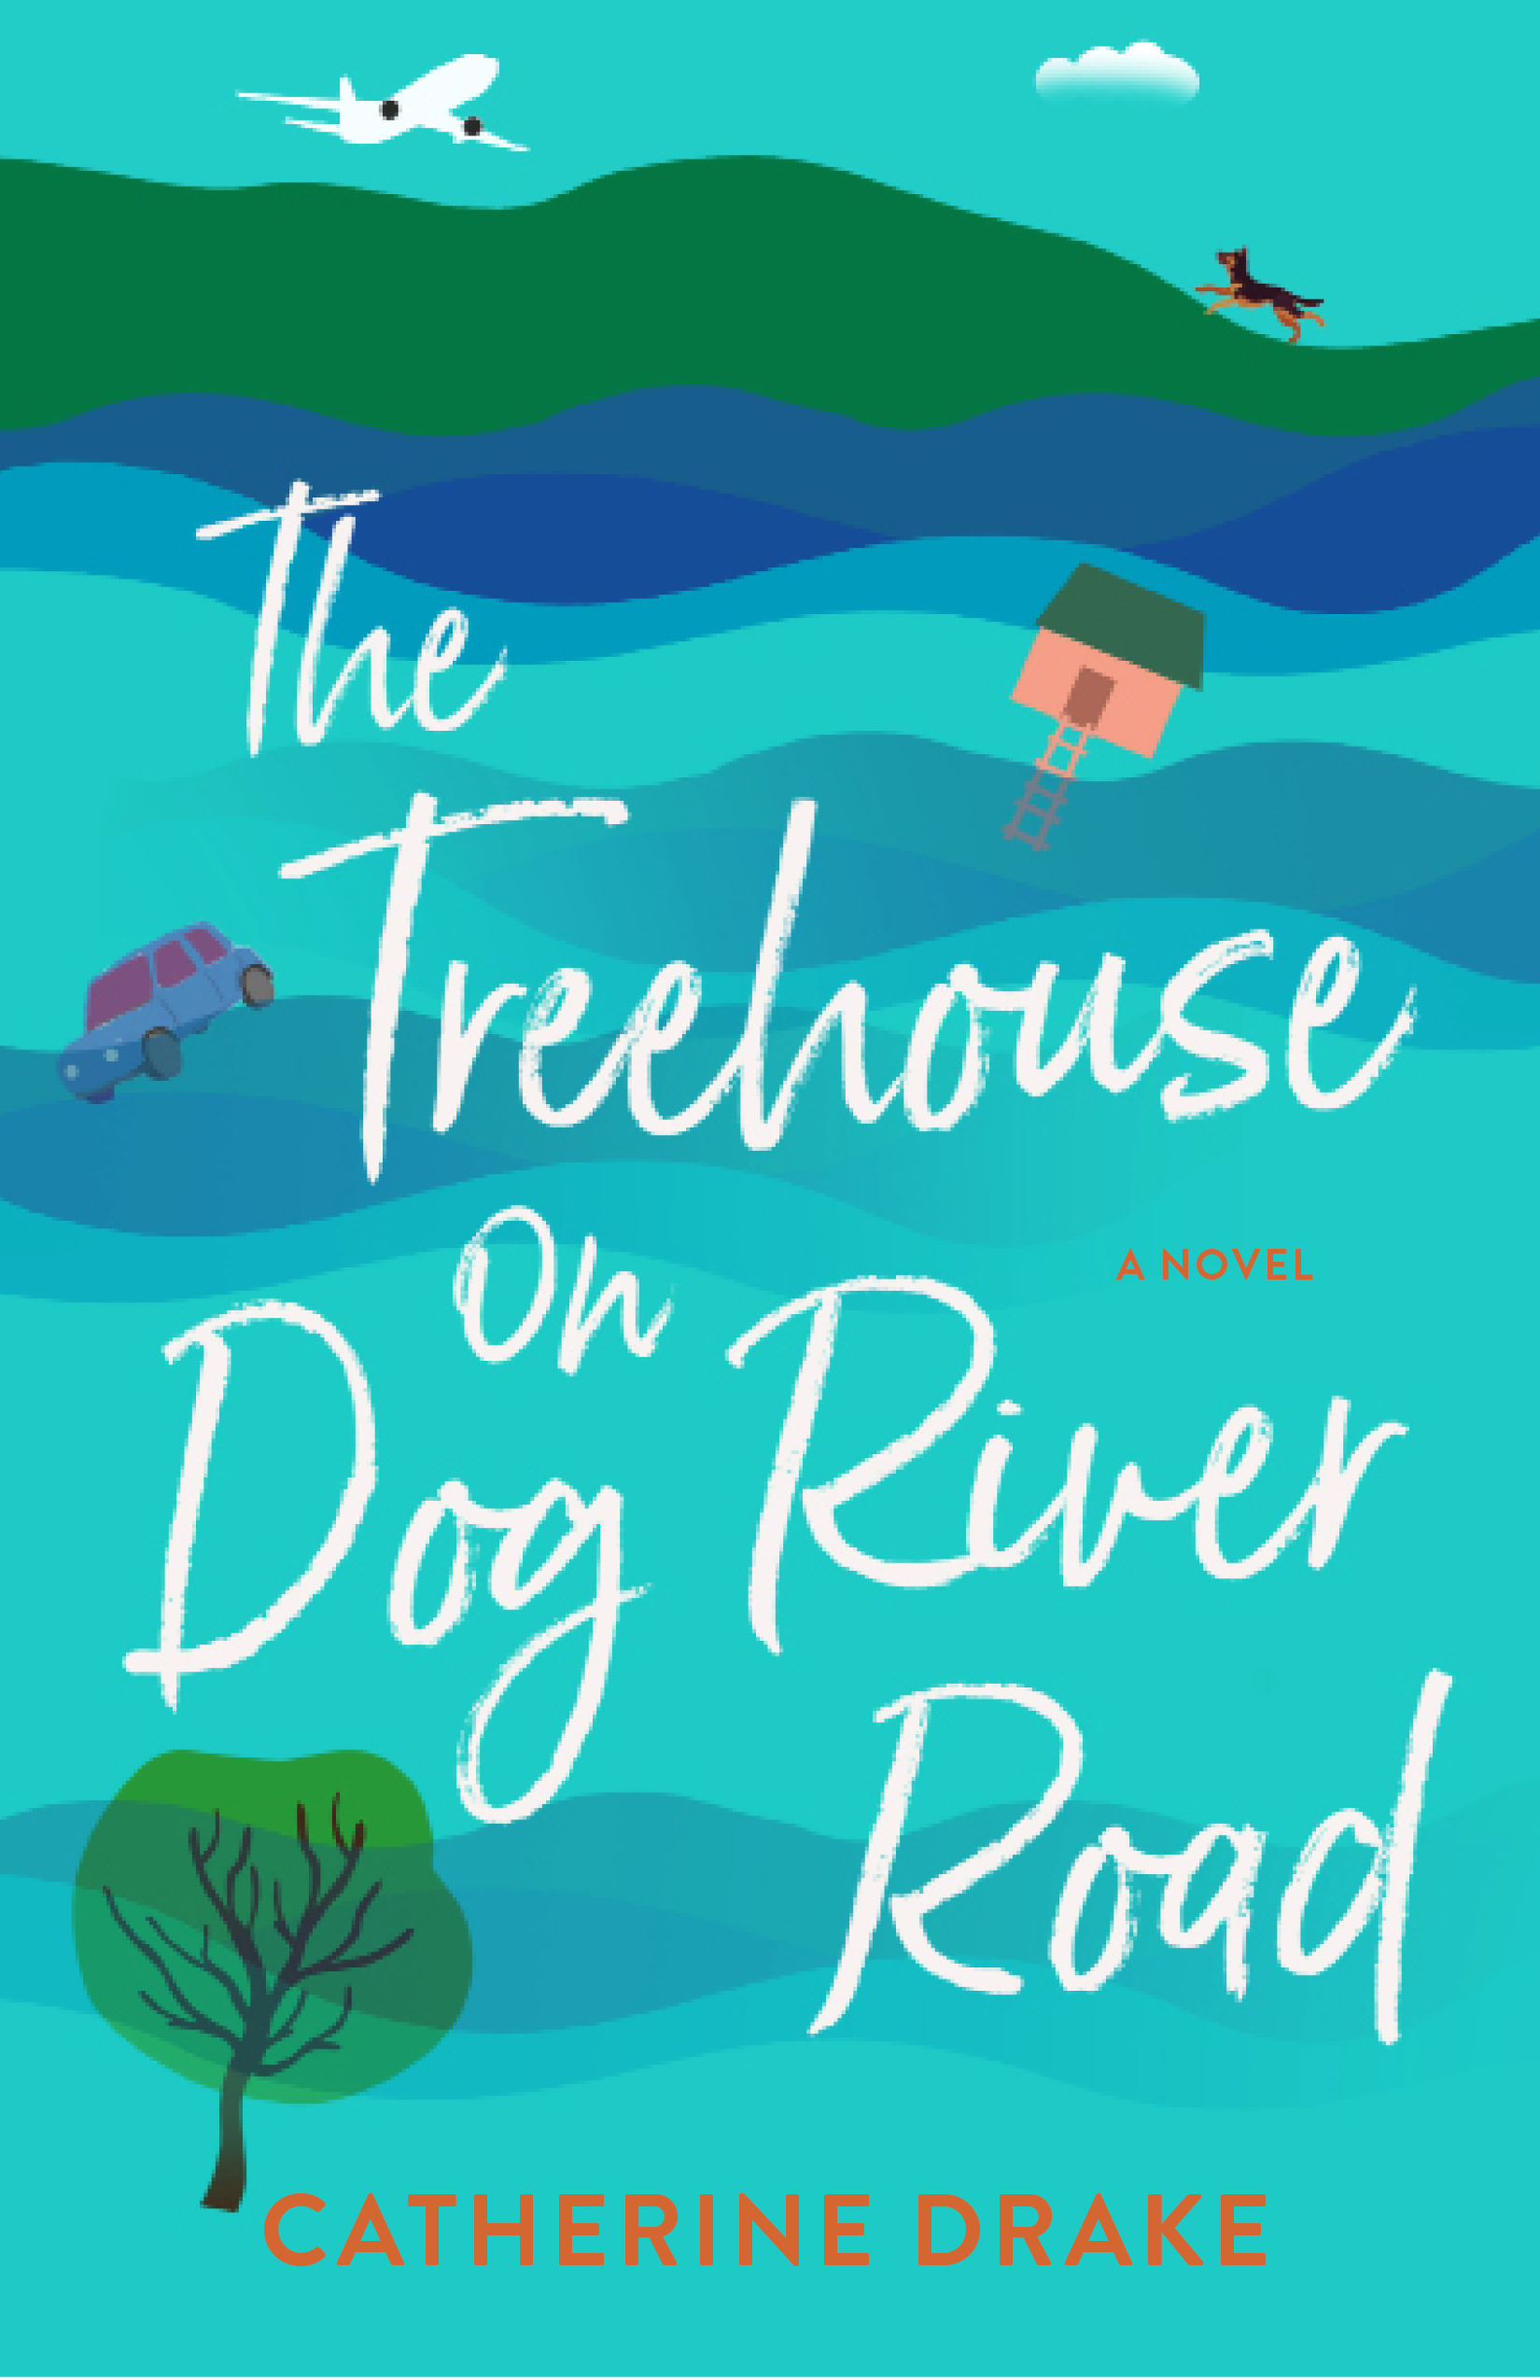 The Treehouse on Dog River Road